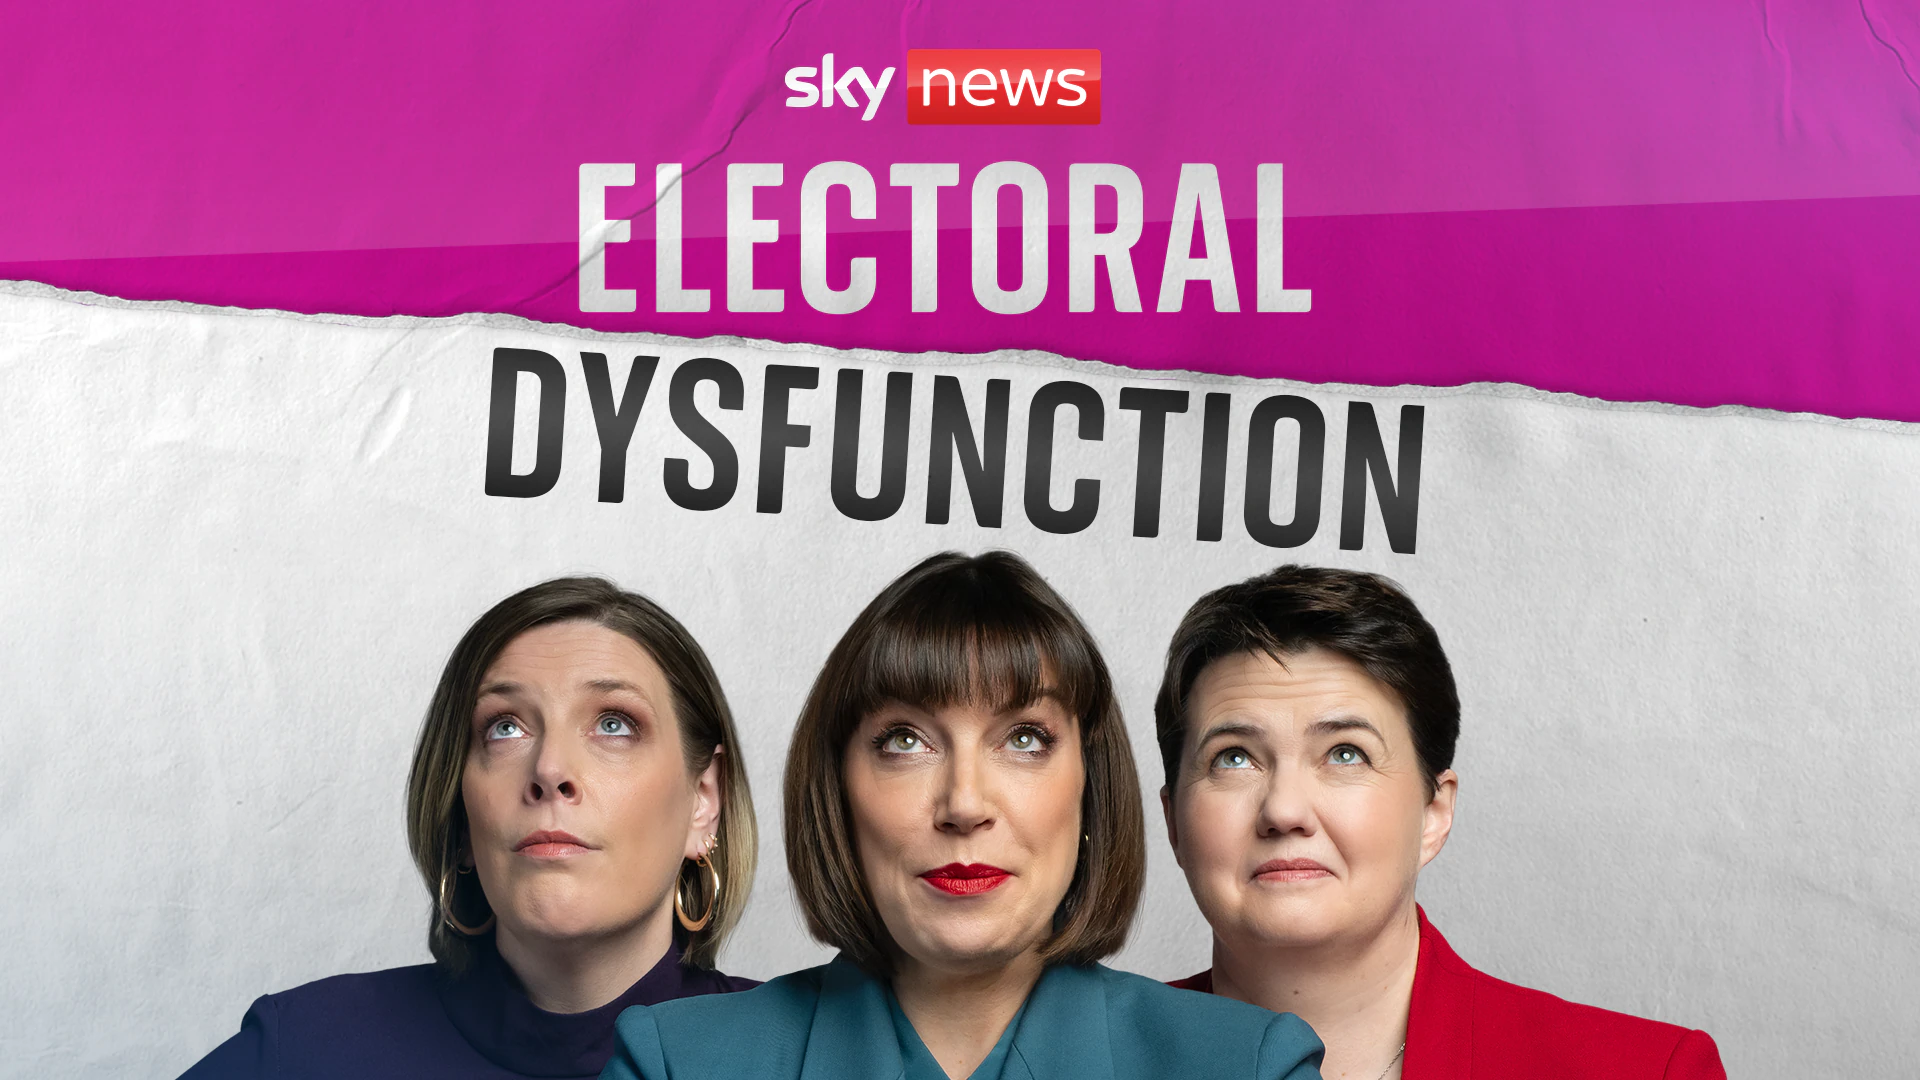 Beth Rigby, Jess Phillips and Ruth Davidson talk Electoral Dysfunction on Sky